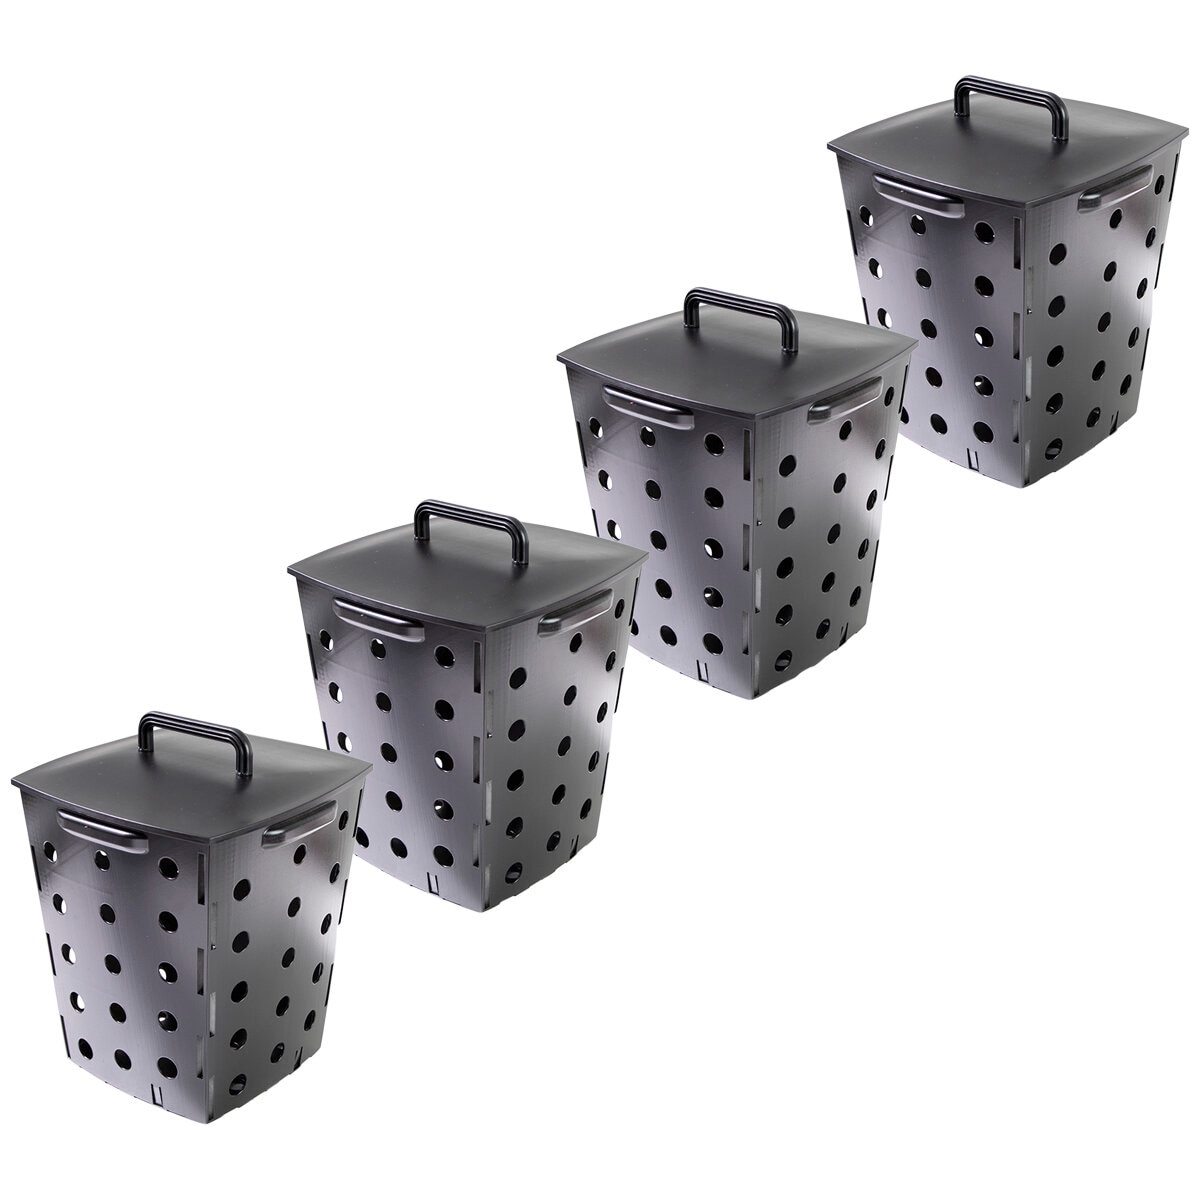 Greenlife Worm Box and Micro Composter 4 Piece Set | Cost